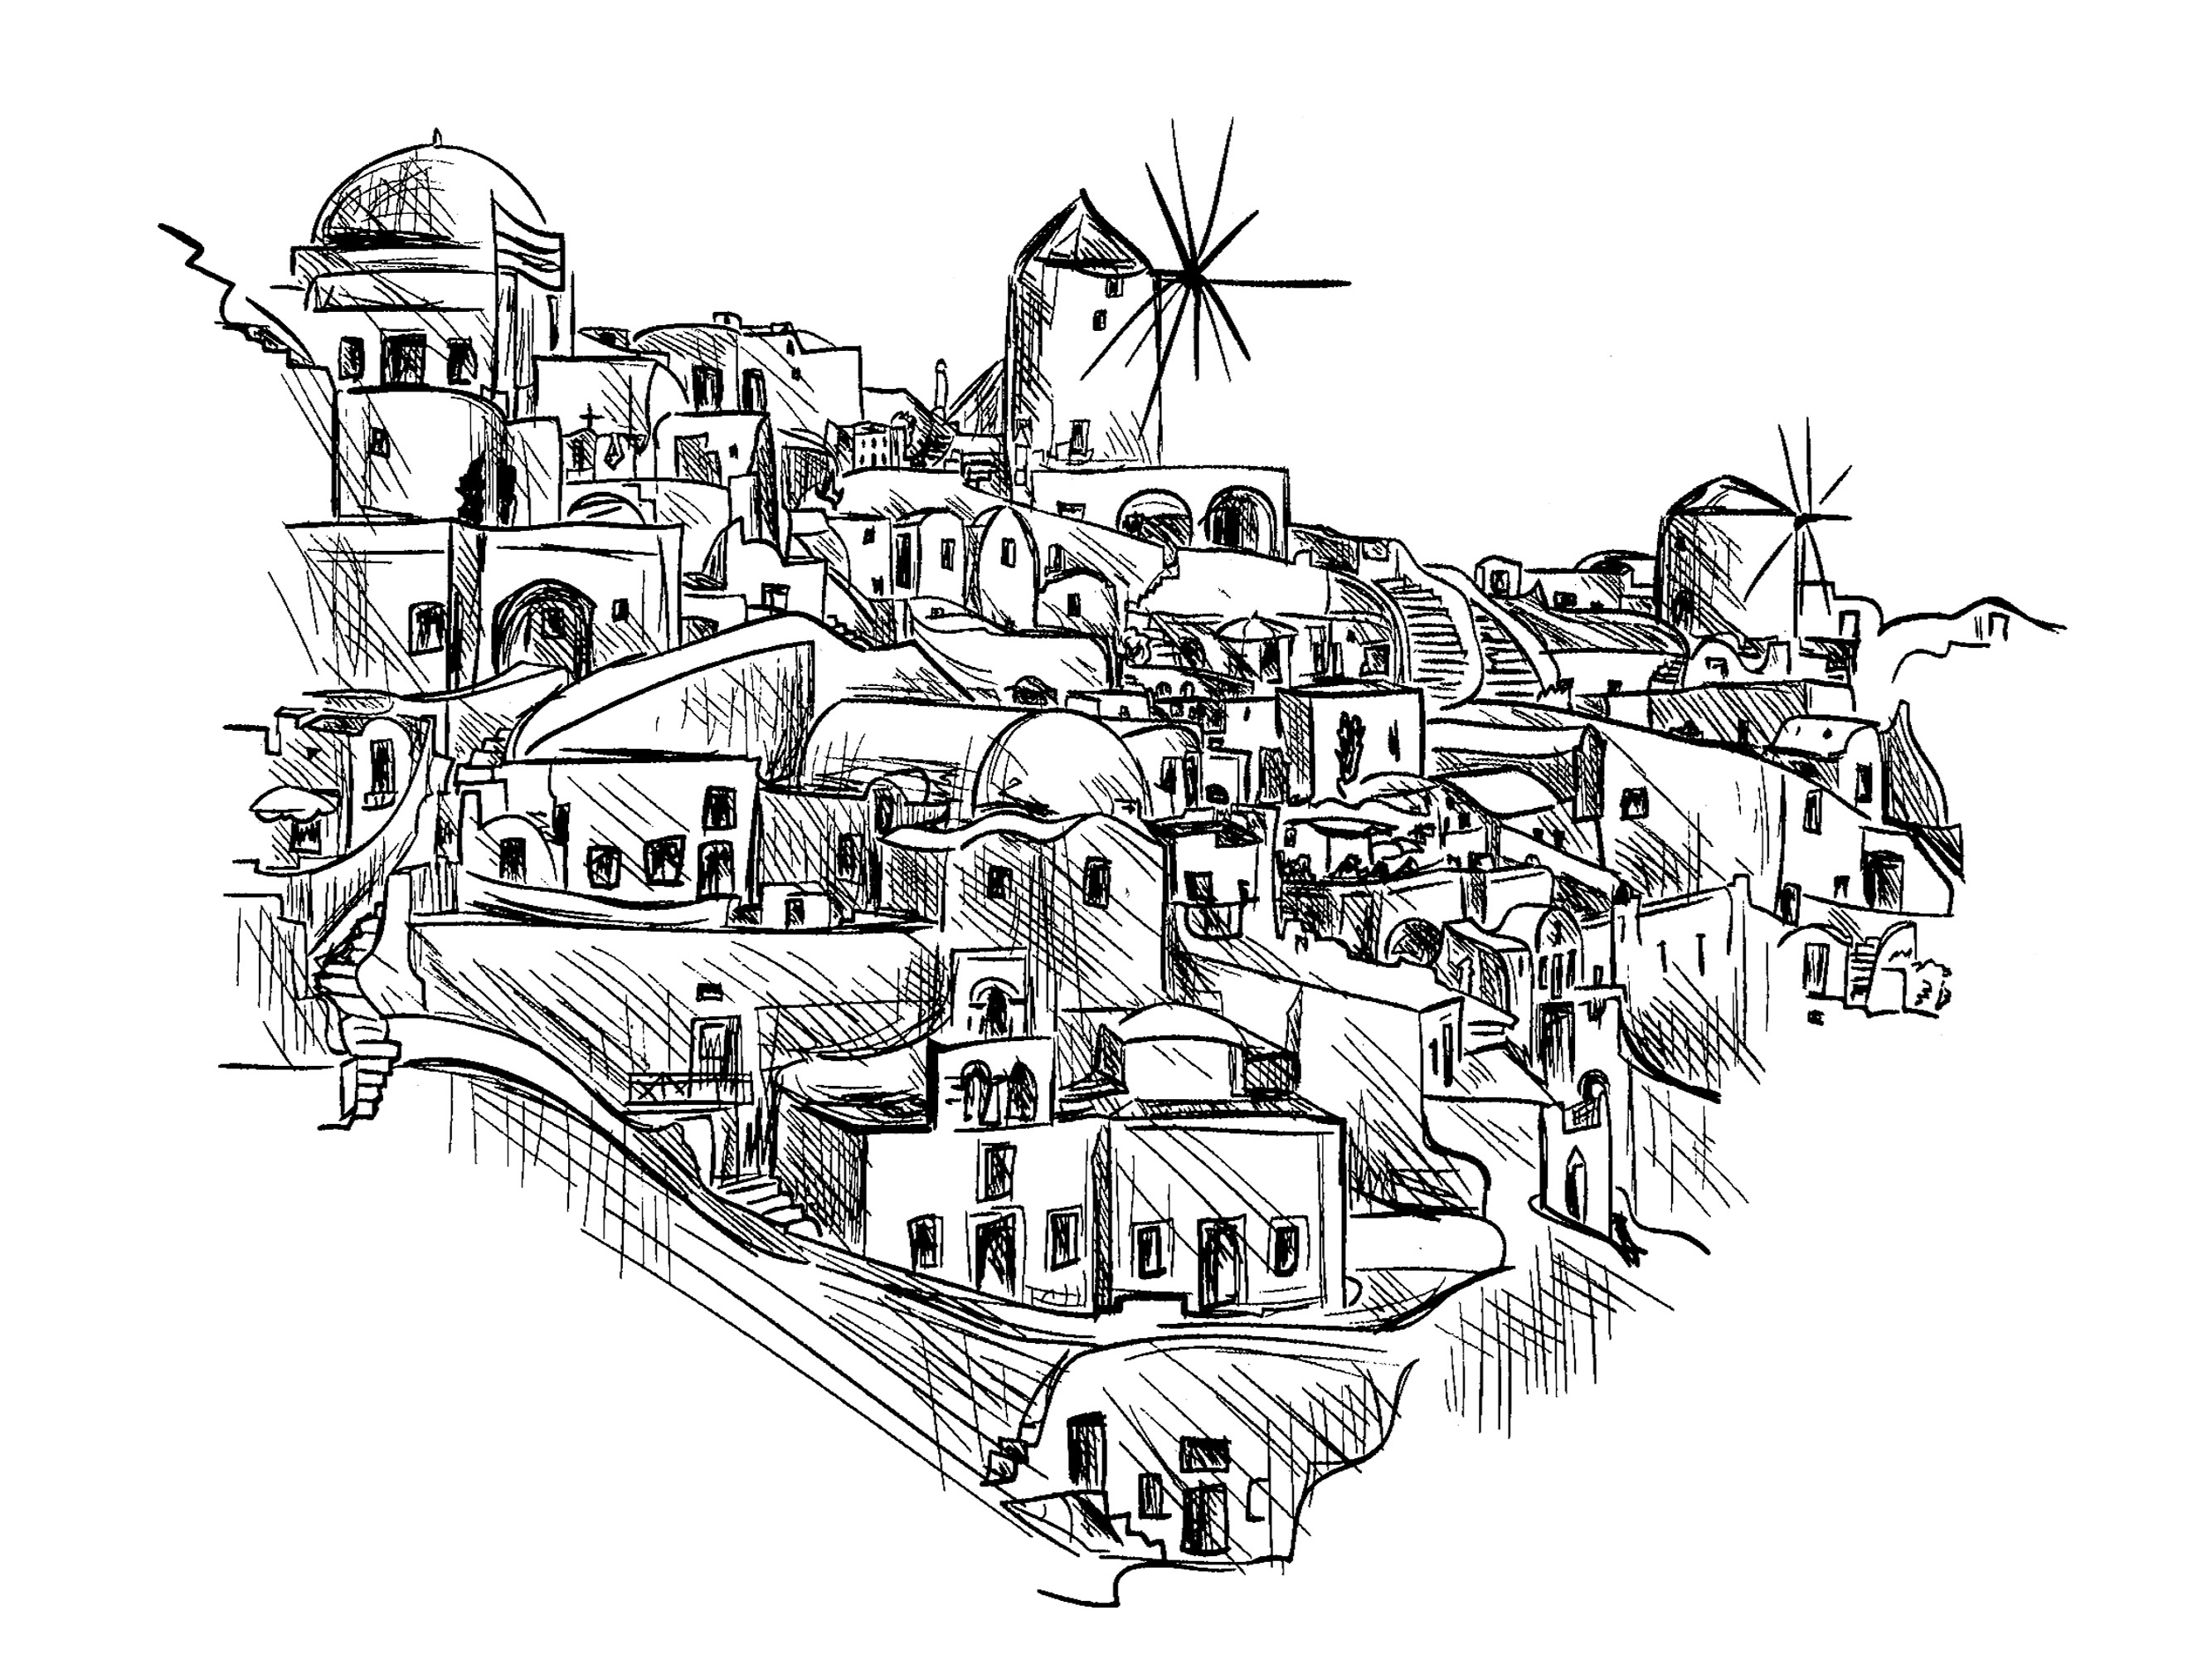 Drawing of a traditional village in Greece with windmill and cute houses